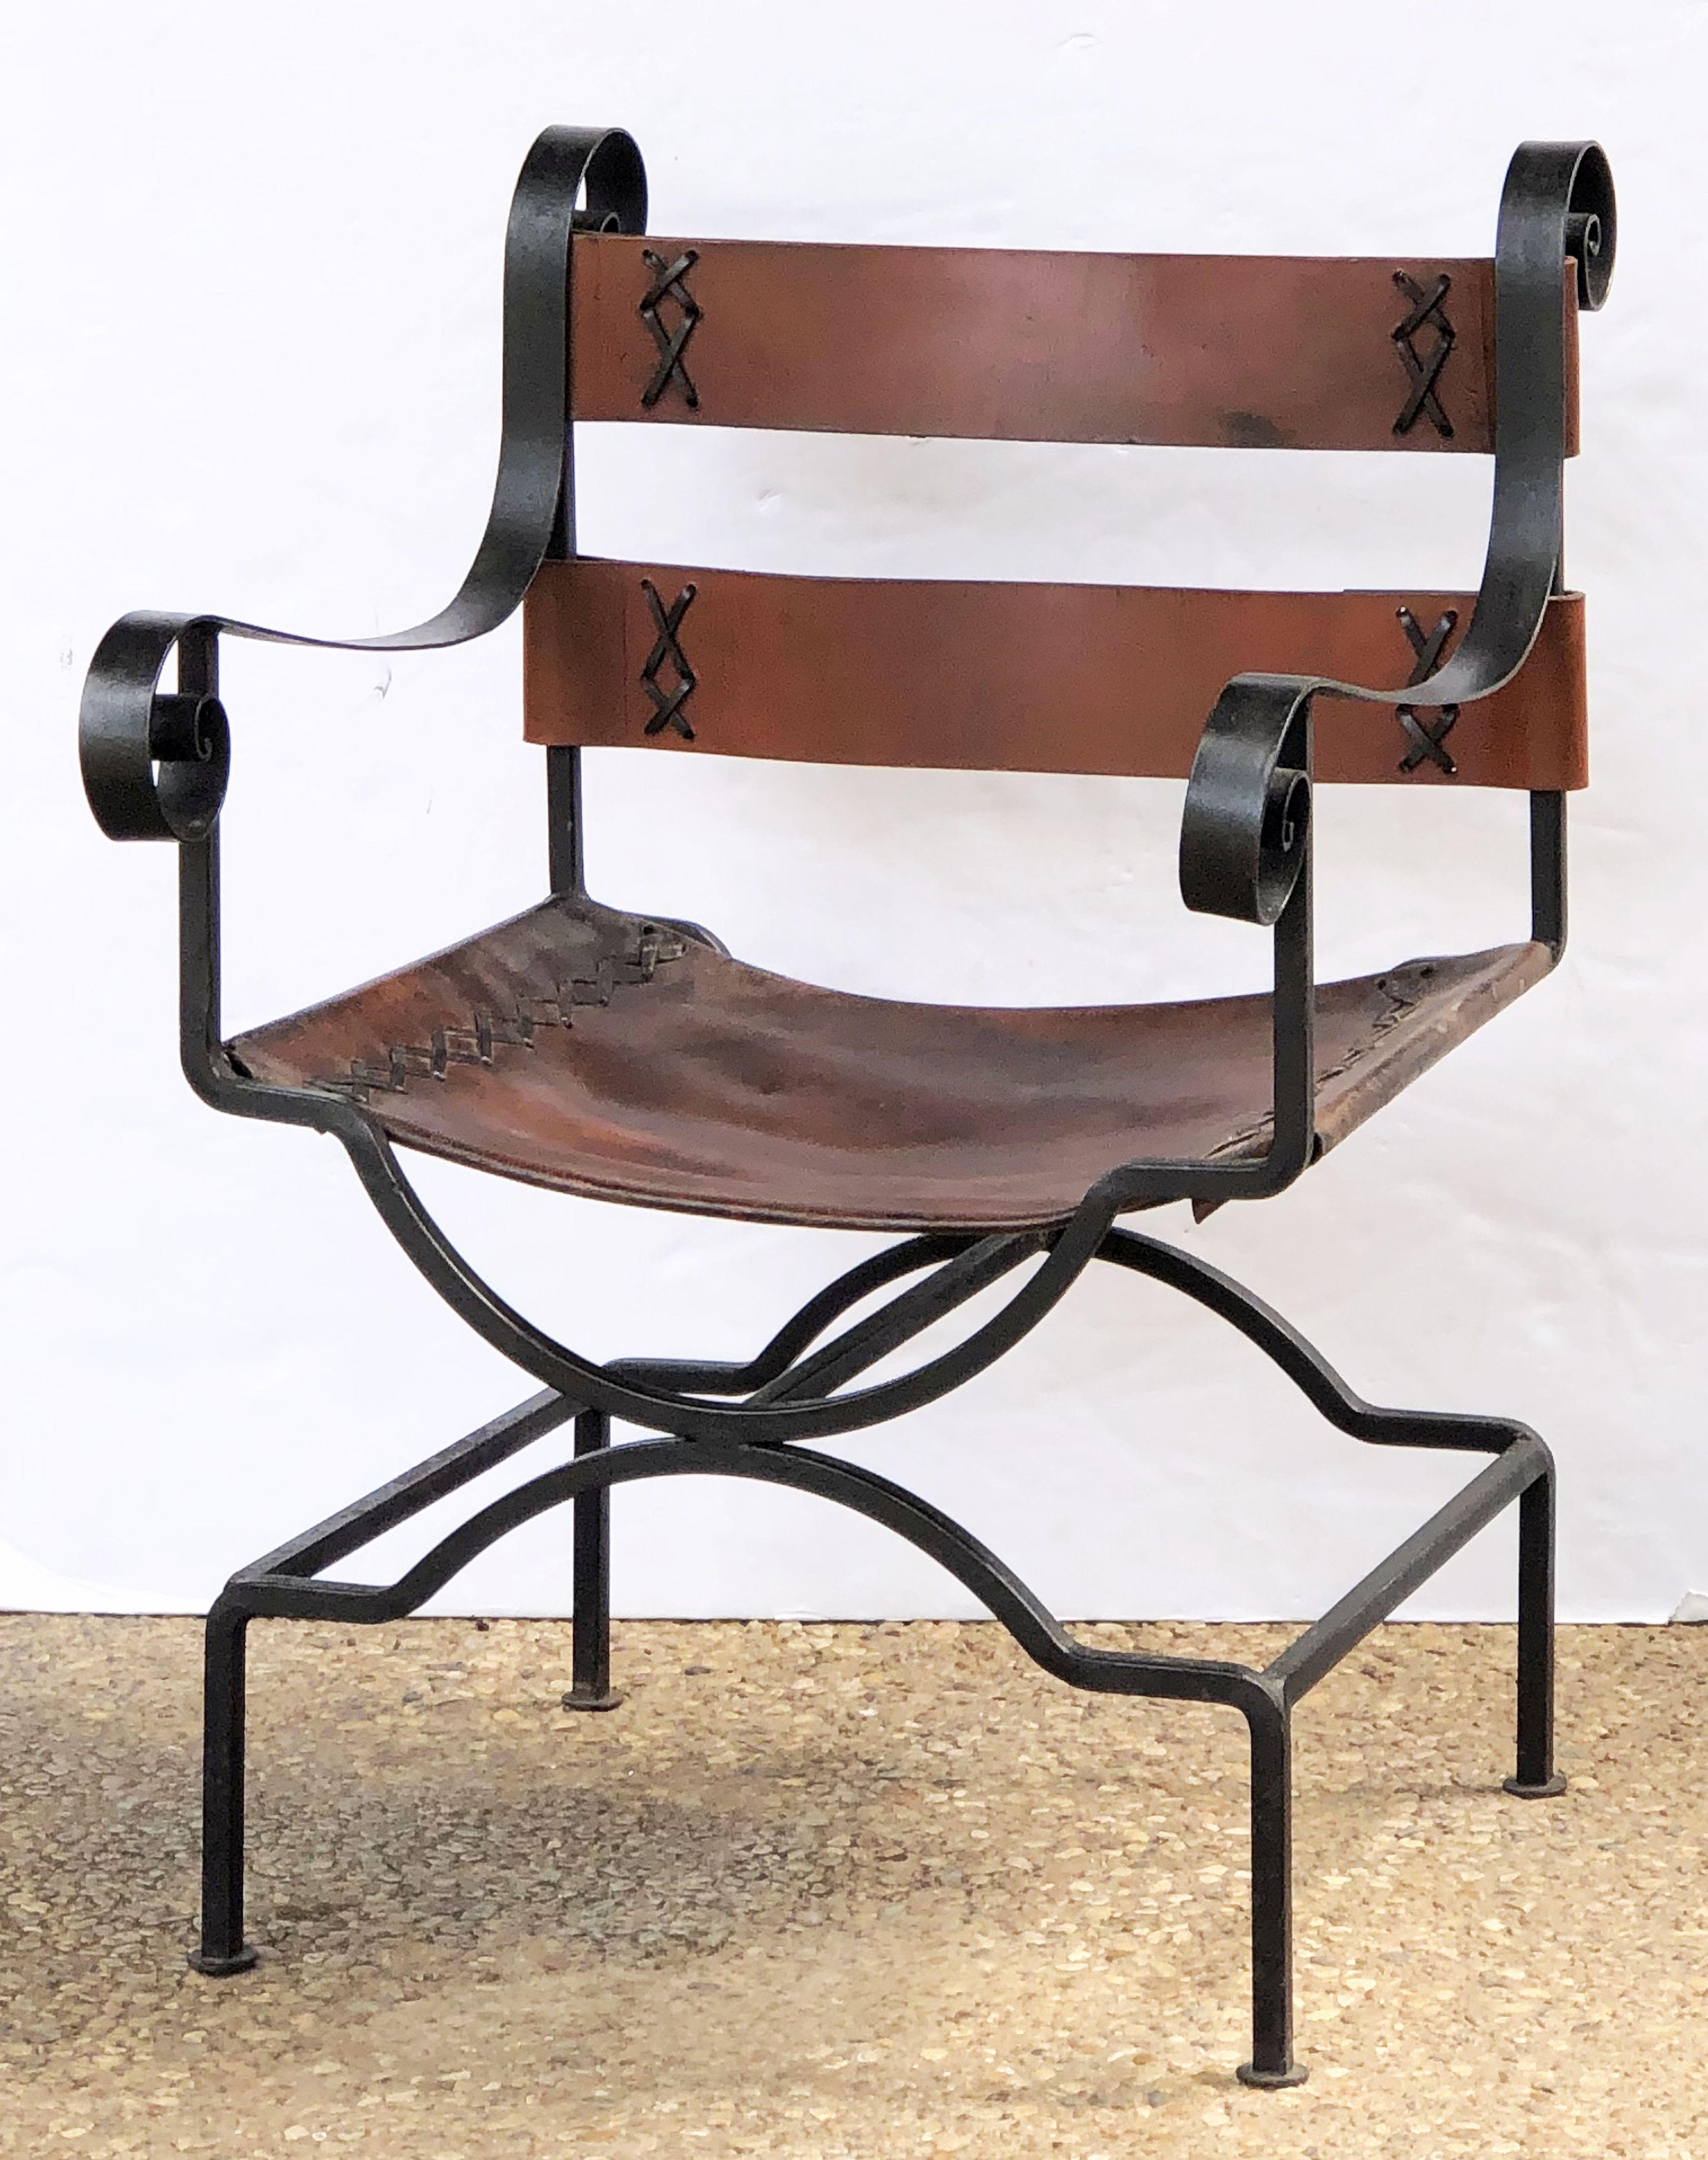 A fine English arm chair or lounge chair, featuring a comfortable back and seat of leather on a stylish, wrought iron frame.